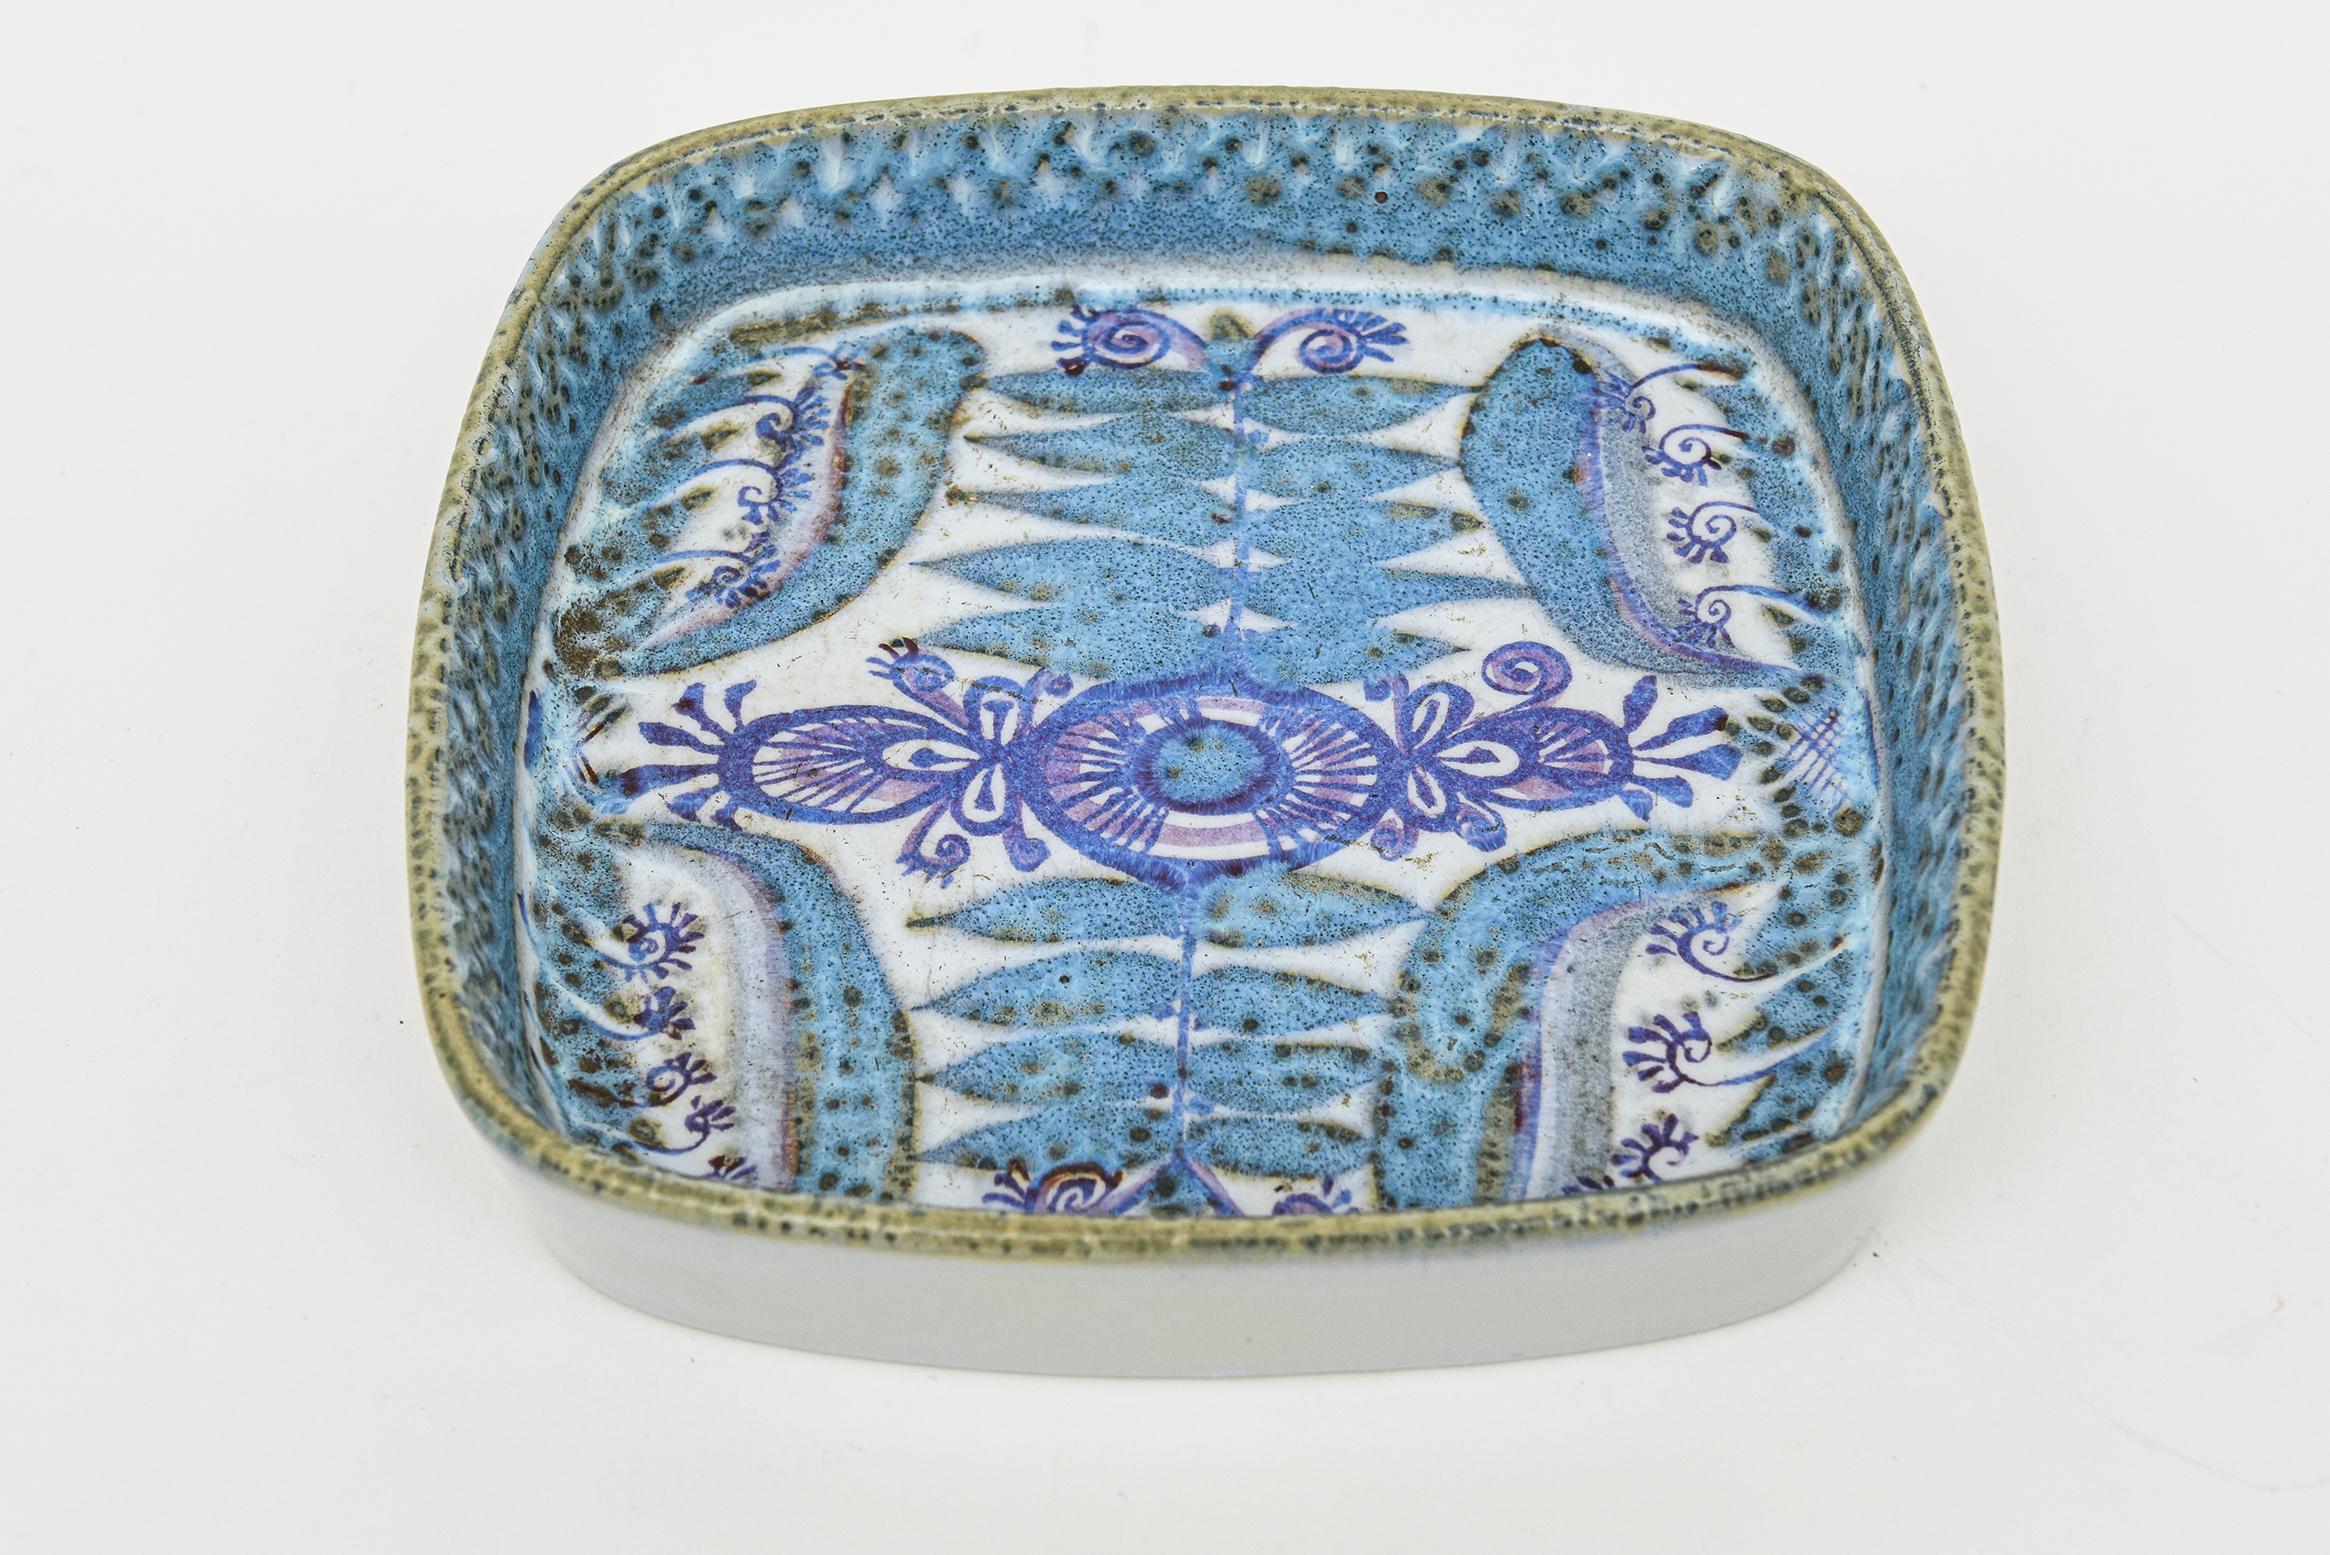 This vintage hallmarked hand painted glazed faience ceramic bowl , dish and or tray is from the 60's and was manufactured by Royal Copenhagen from Denmark. This was a craft known by many but mastered by few in the hand painting of these porcelain